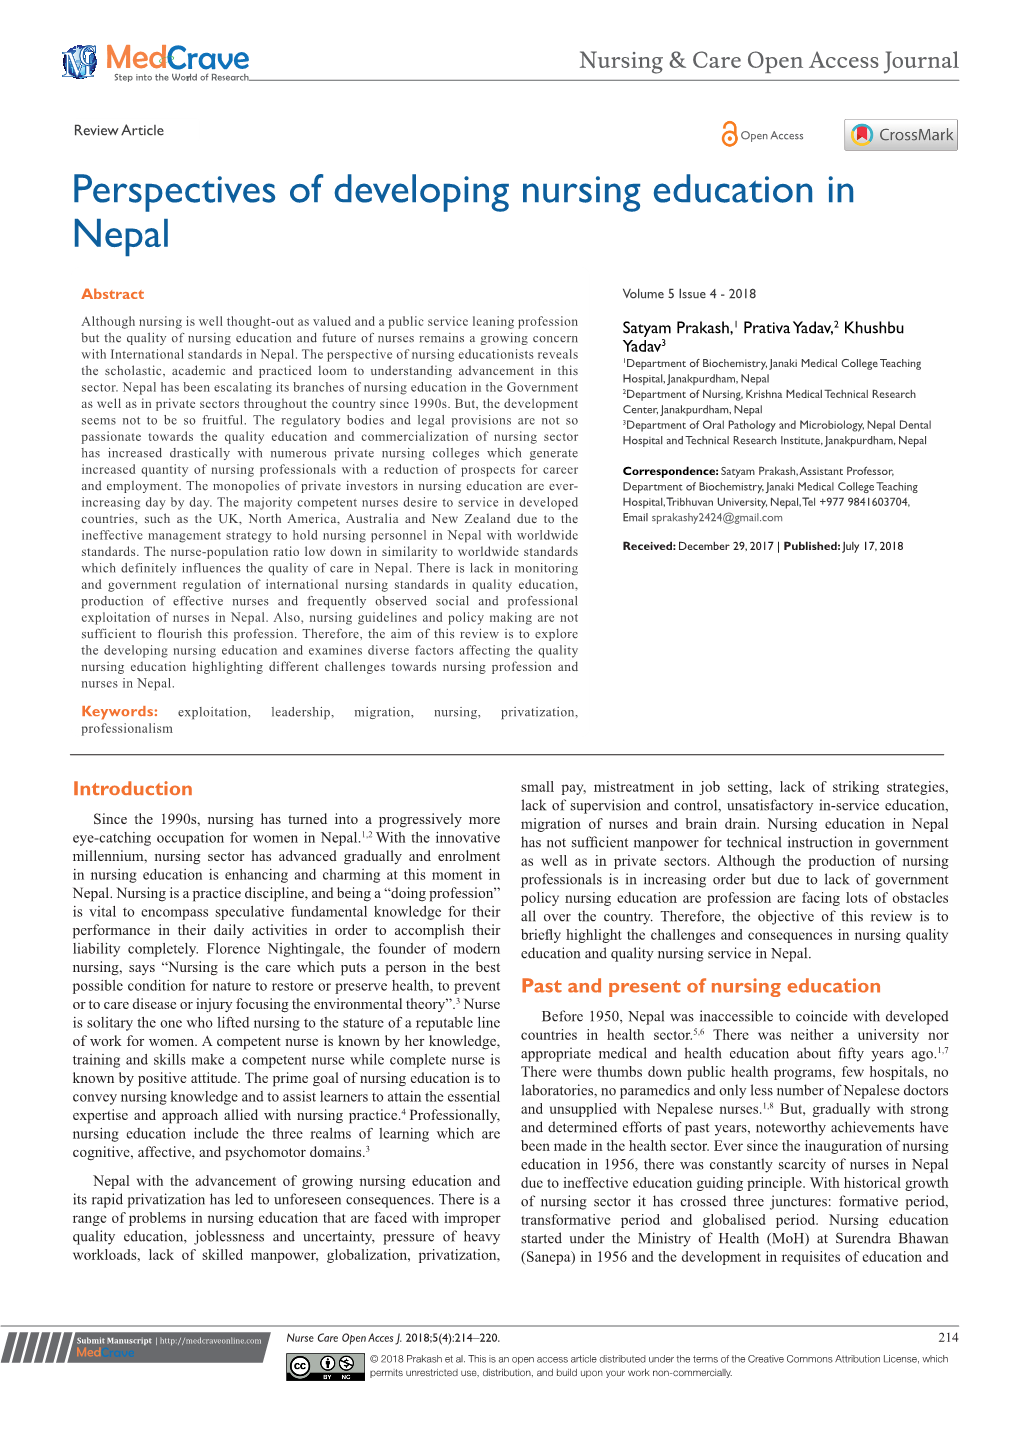 Perspectives of Developing Nursing Education in Nepal